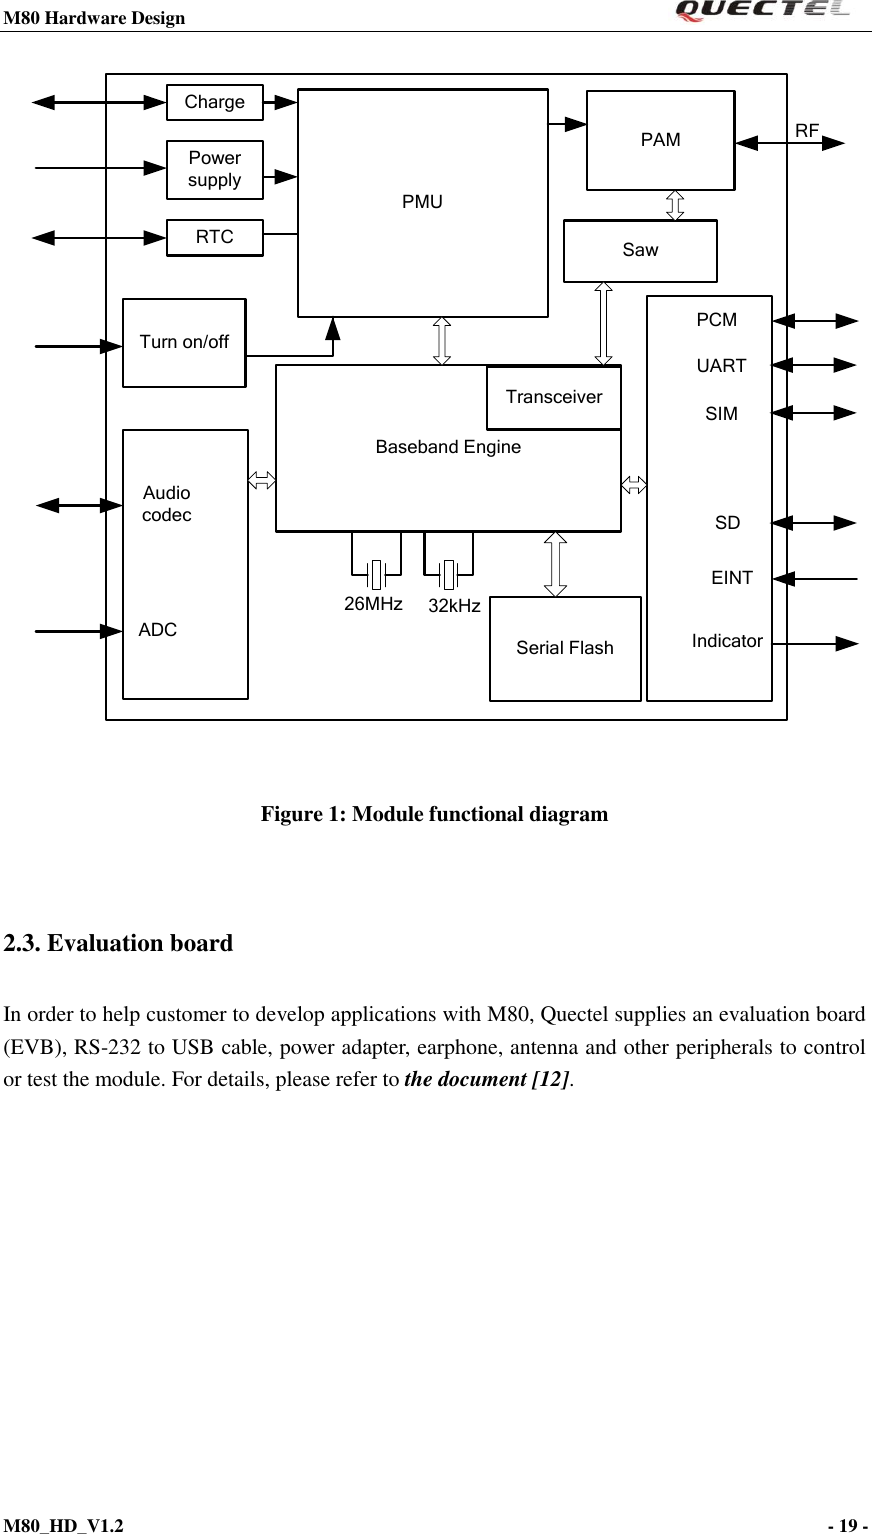 M80 Hardware Design                                                                M80_HD_V1.2                                                                                                                                        - 19 -    Serial FlashBaseband EnginePAMPMUPower supplyRTCChargeUARTSIMSDEINTTurn on/offIndicatorADCPCMTransceiverSaw26MHz 32kHzAudiocodecRF  Figure 1: Module functional diagram  2.3. Evaluation board In order to help customer to develop applications with M80, Quectel supplies an evaluation board (EVB), RS-232 to USB cable, power adapter, earphone, antenna and other peripherals to control or test the module. For details, please refer to the document [12].    